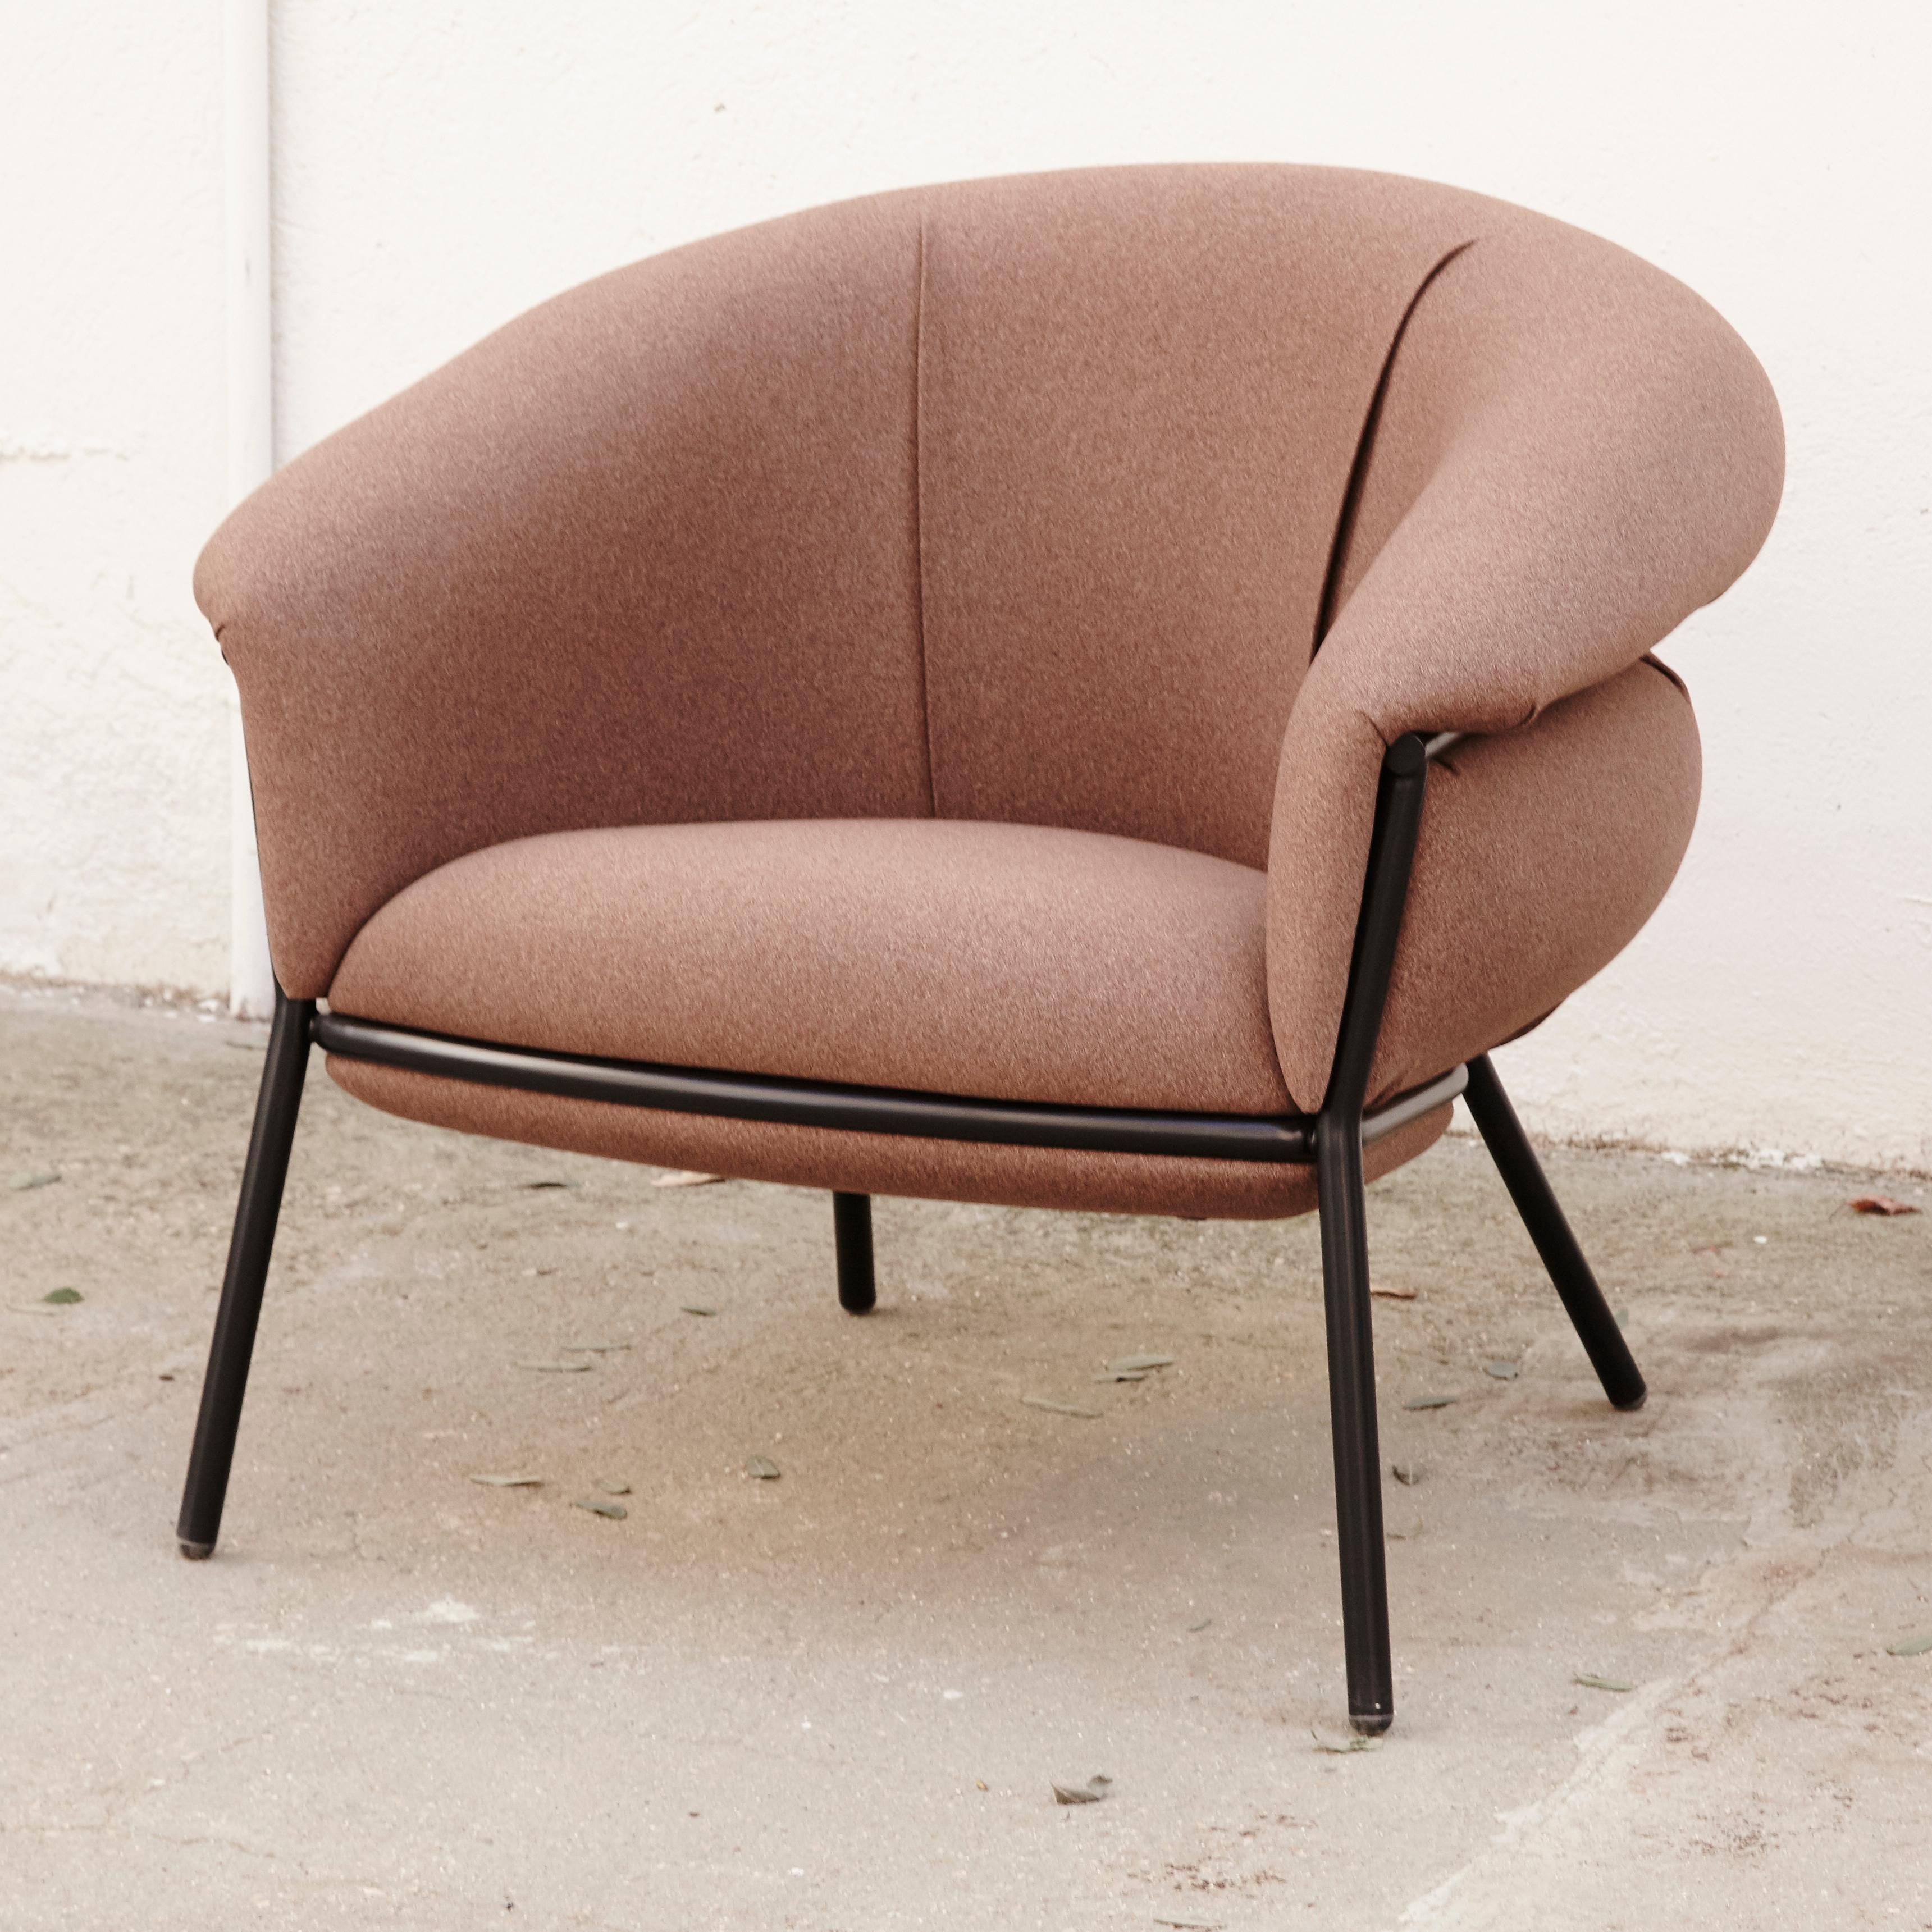 Modern Stephen Burks Contemporary Fabric Upholstered and Iron 'Grasso' Armchair for BD For Sale